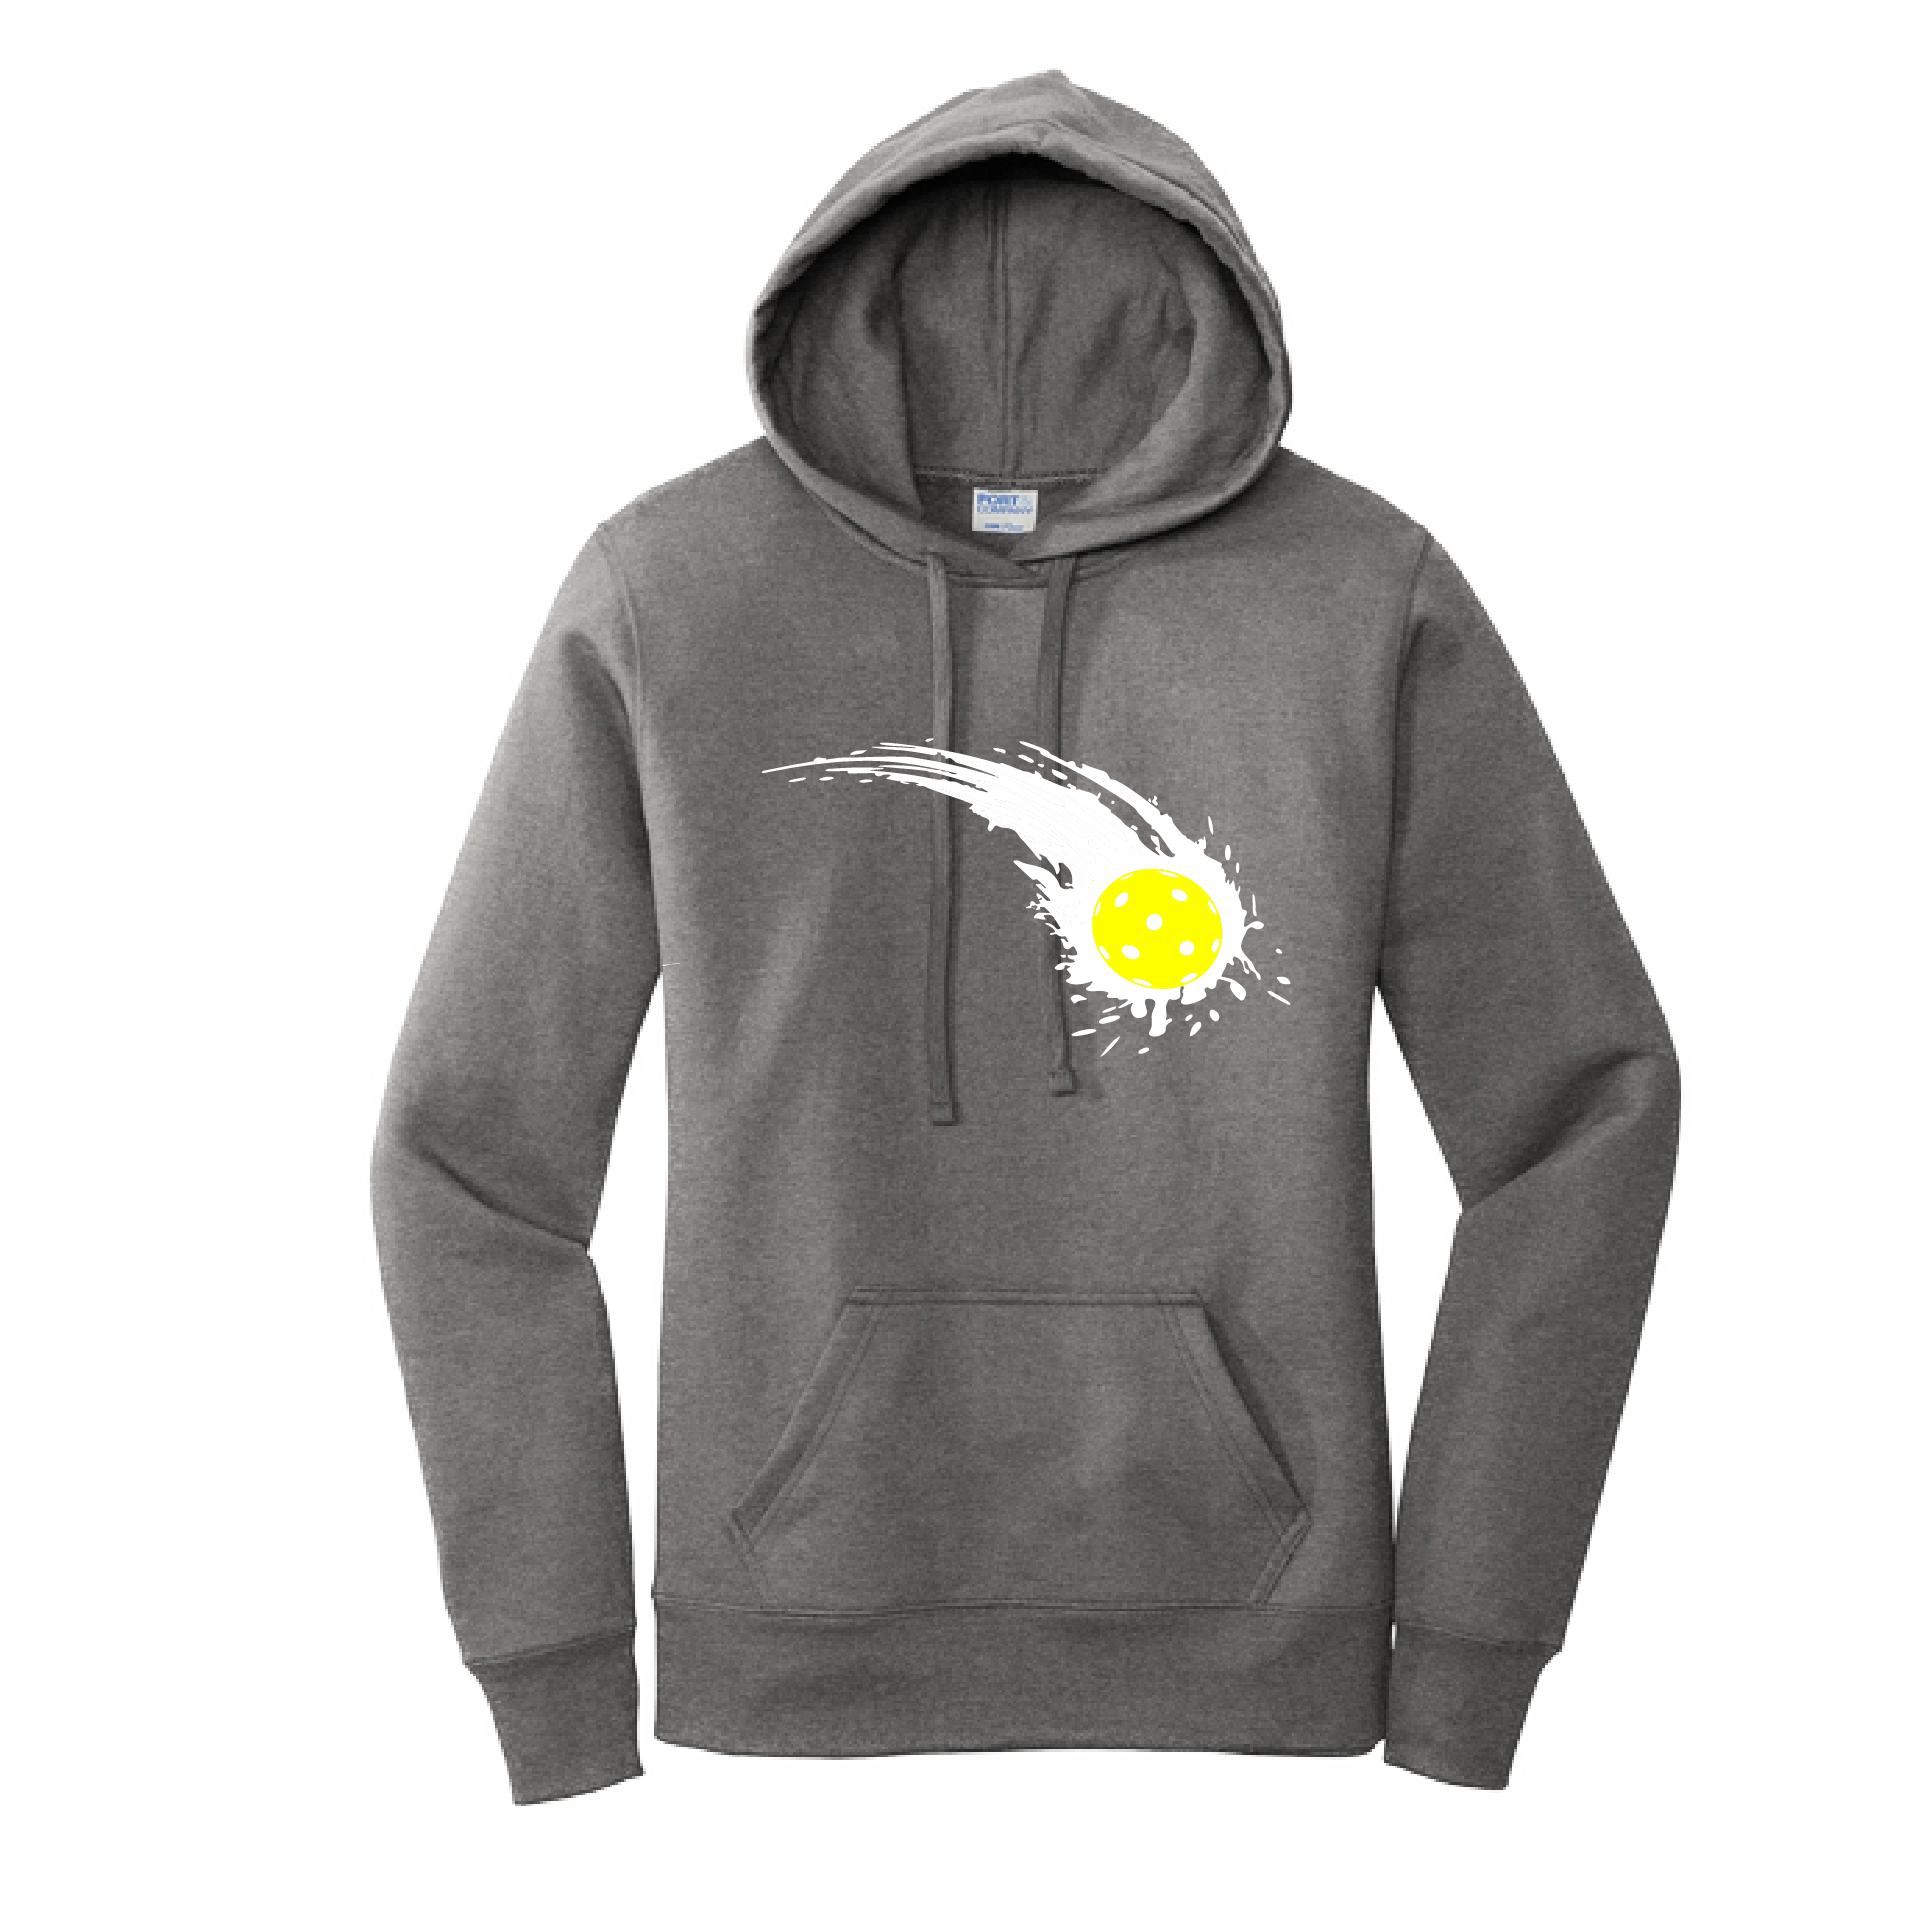 Pickleball Design: Impact  Women's Hooded pullover Sweatshirt  Turn up the volume in this Women's Sweatshirts with its perfect mix of softness and attitude. Ultra soft lined inside with a lined hood also. This is fitted nicely for a women's figure. Front pouch pocket.